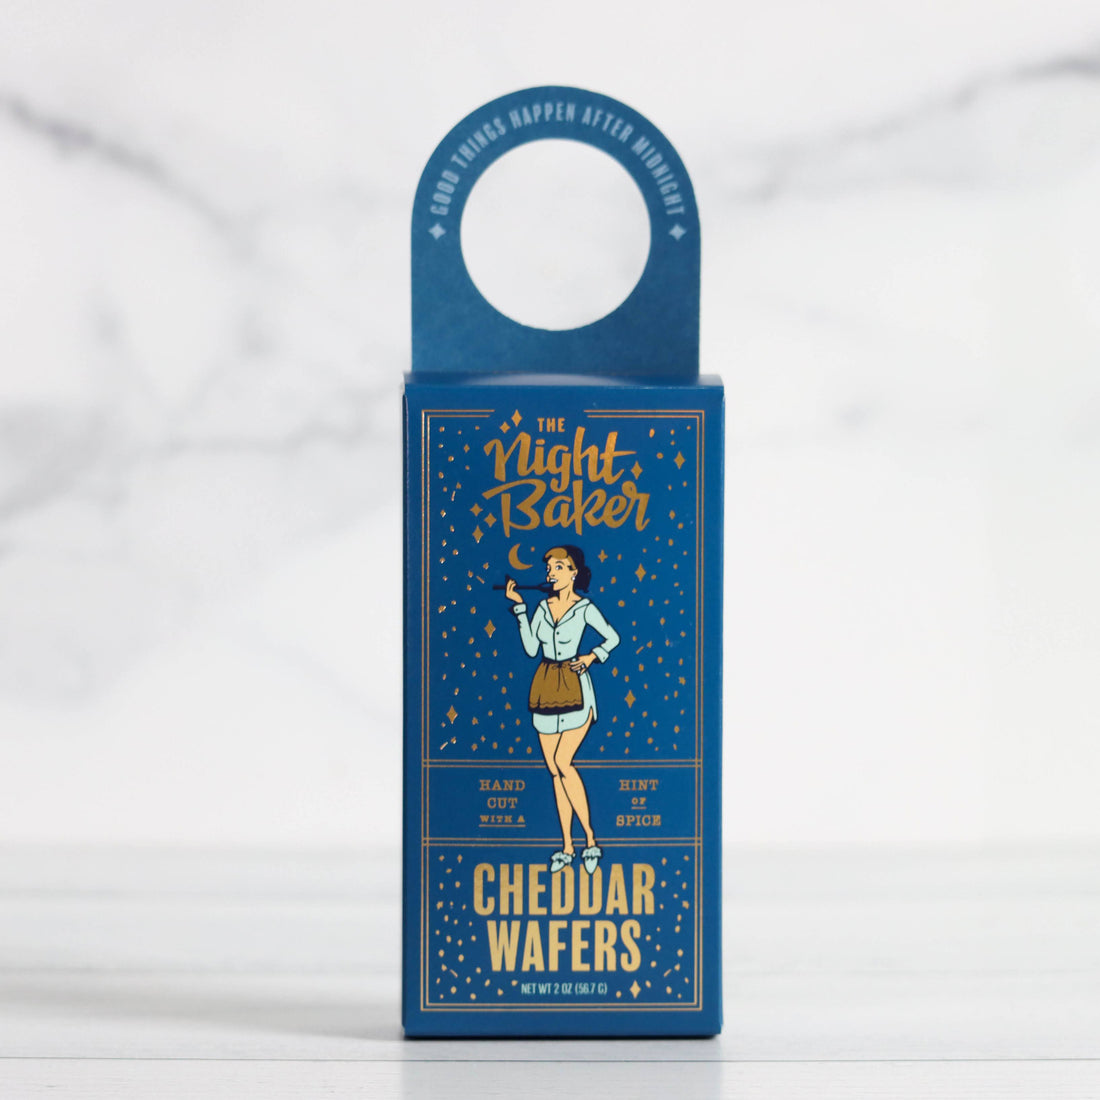 The Night Baker Cheddar Cheese Wafers Wine Bottle Box Snack